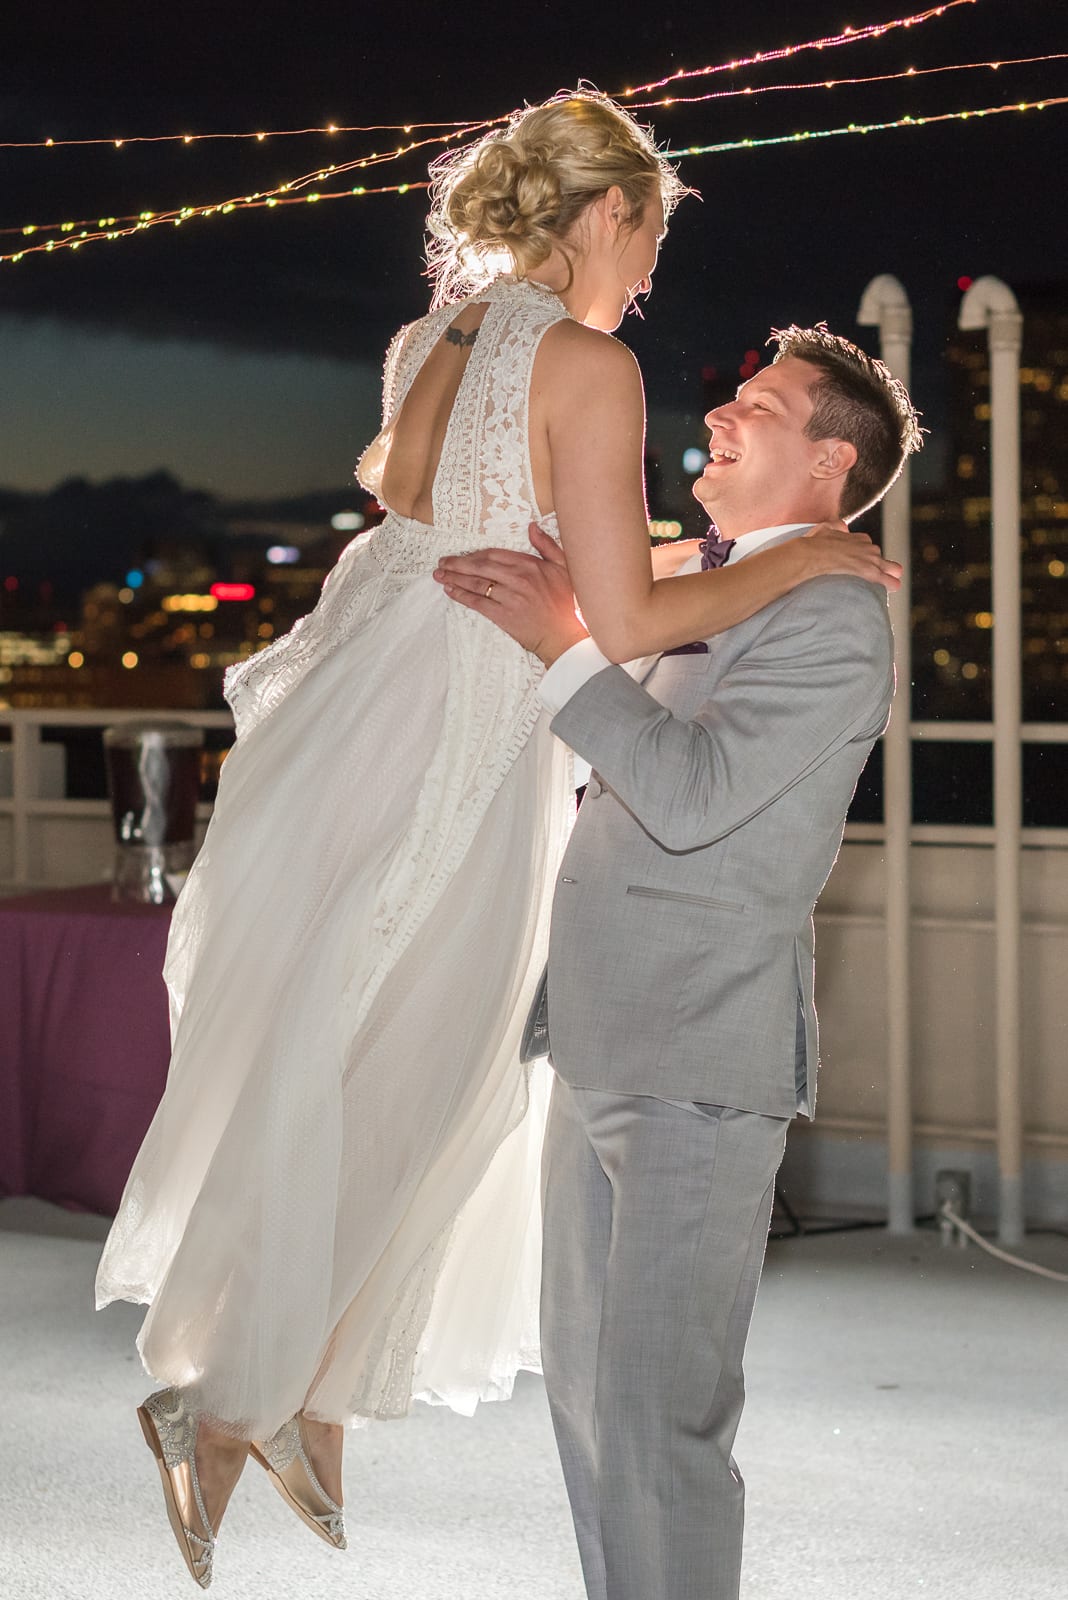 rooftop wedding | Wedding Photography | Denver | From the Hip Photo